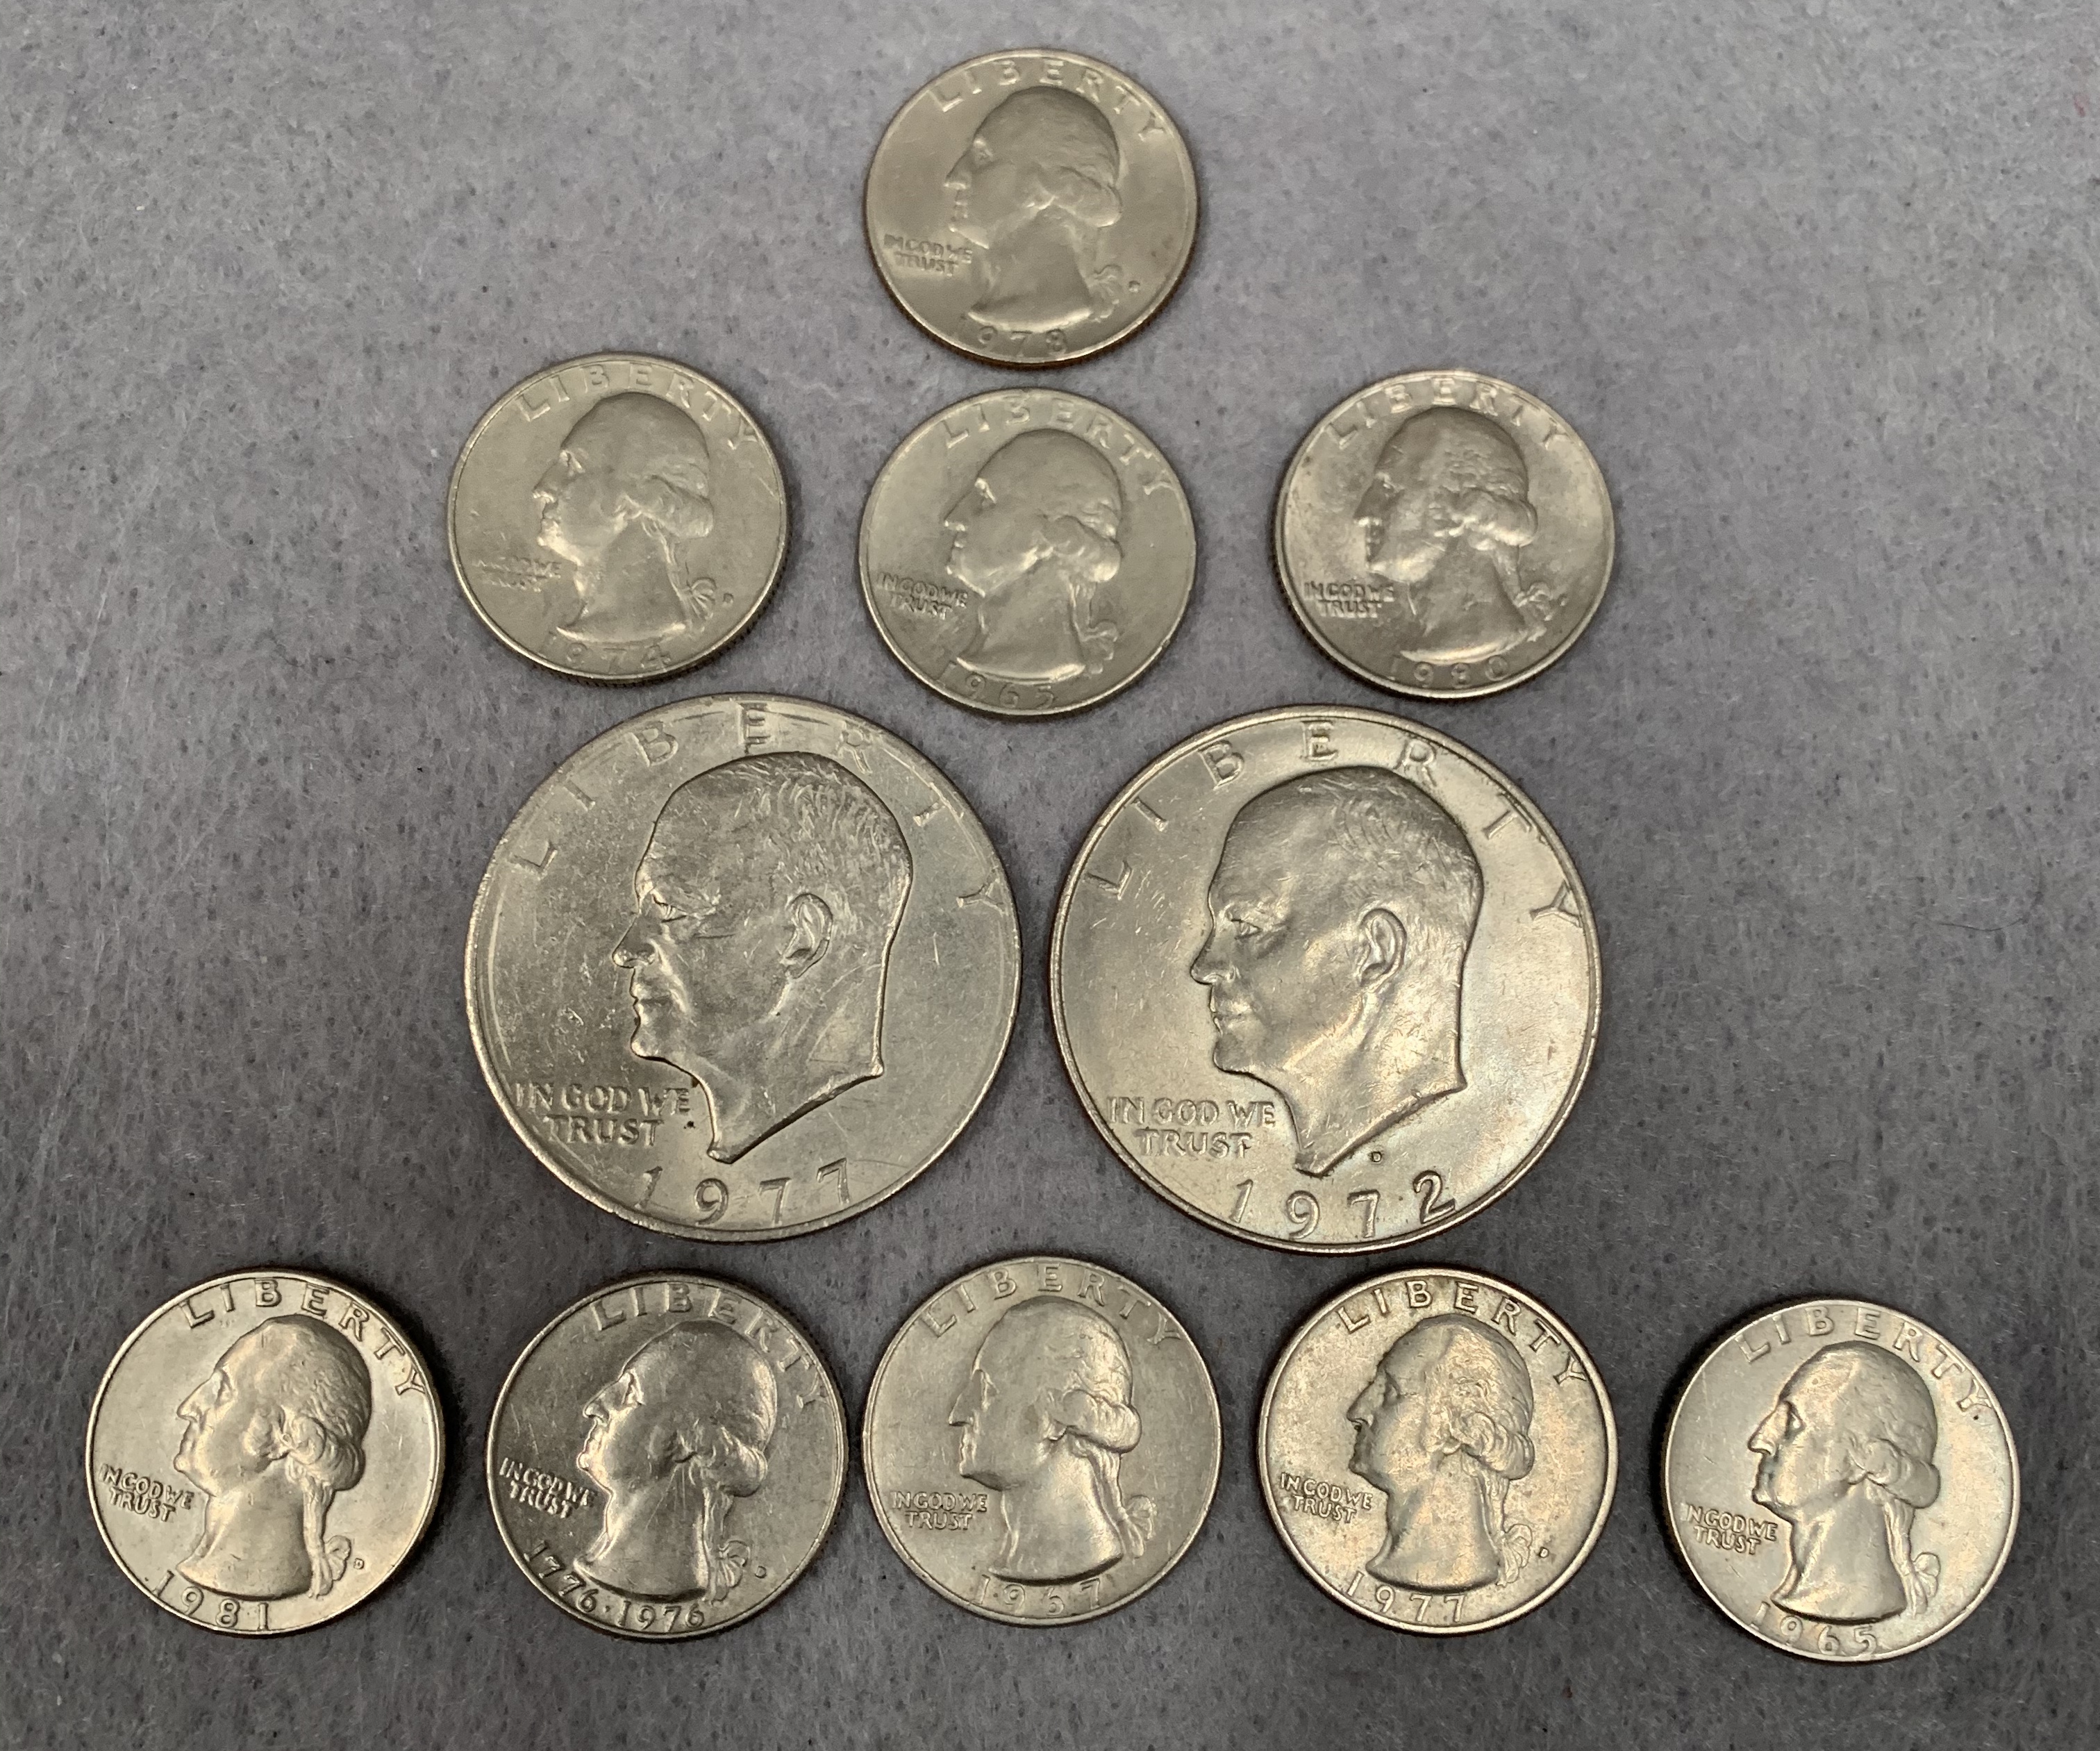 Contents to bag - two American dollars 1972 and 1977, nine American quarter dollars 1960s, - Image 3 of 4